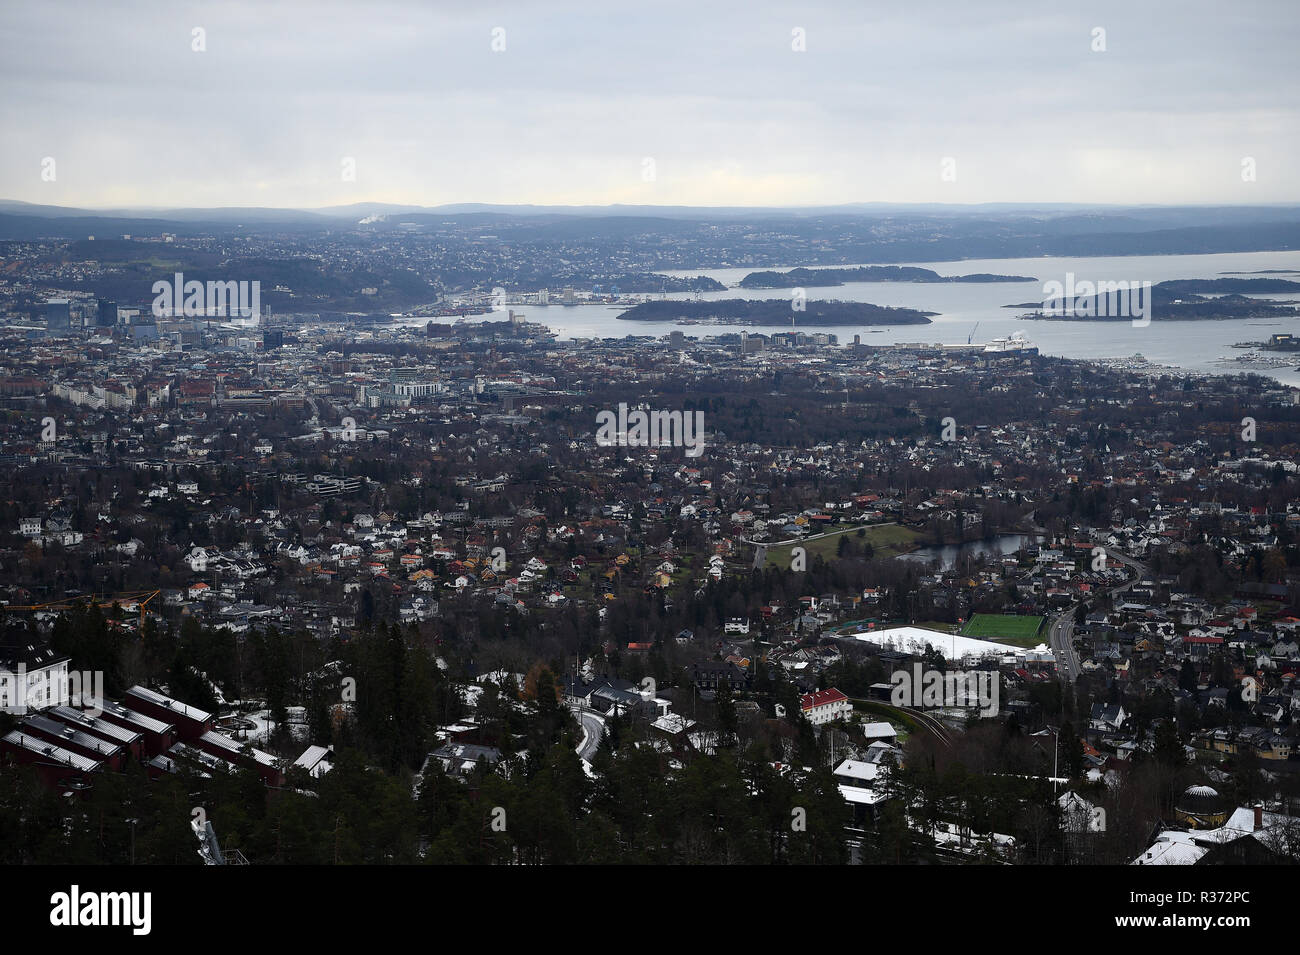 A view over the city of Oslo from the top of the Holmenkollen ski jump in Norway. Stock Photo